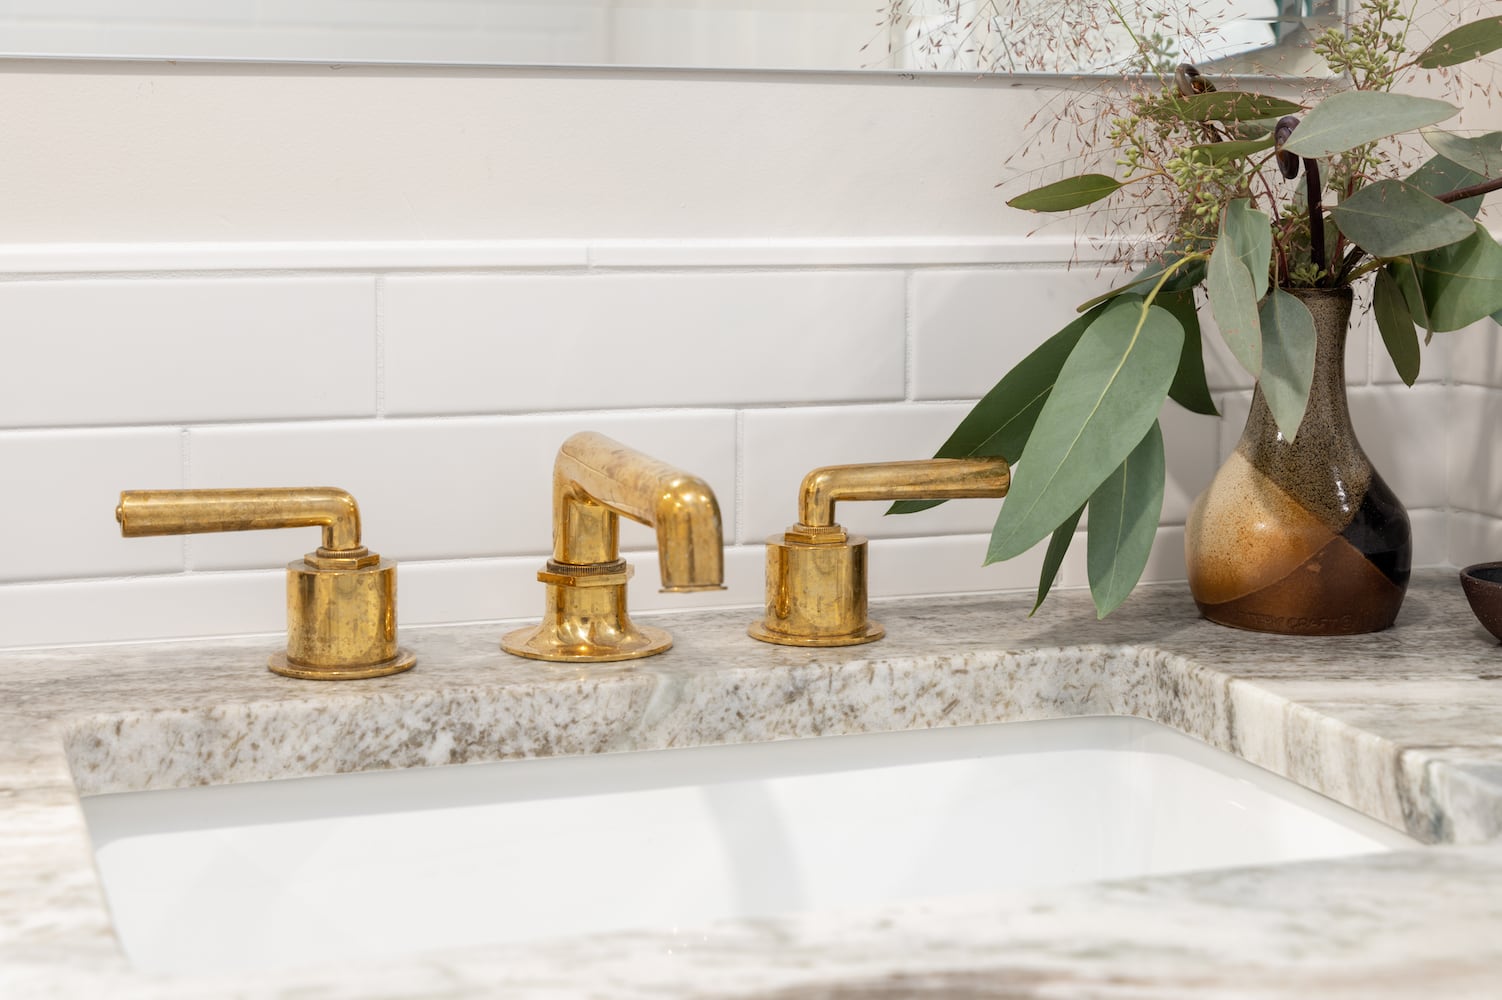 Close-up of living finish bathroom sink with burnished brass faucet and marble counter